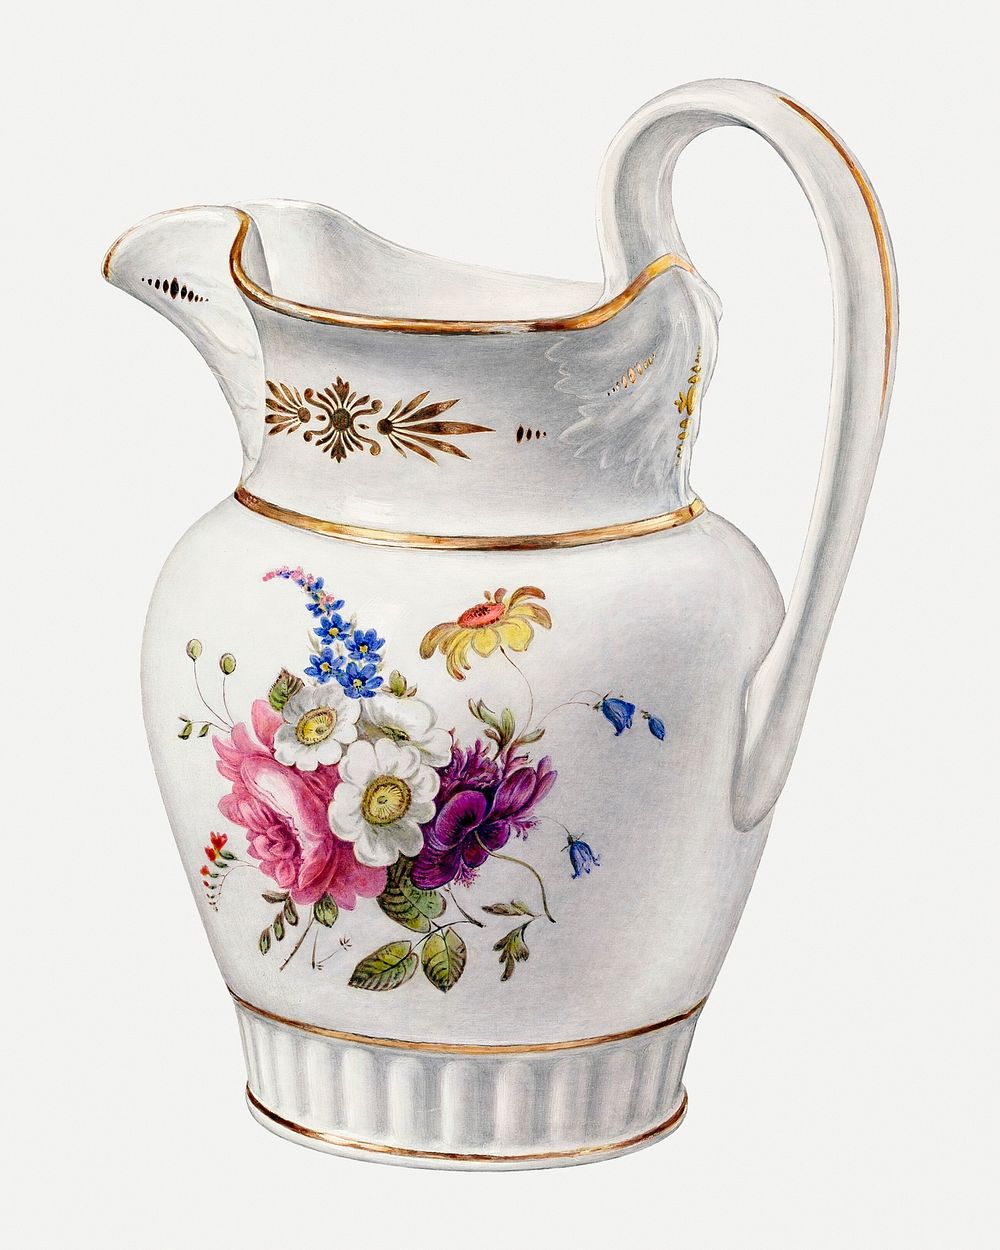 Vintage floral pitcher psd illustration, remixed from the artwork by Paul Ward